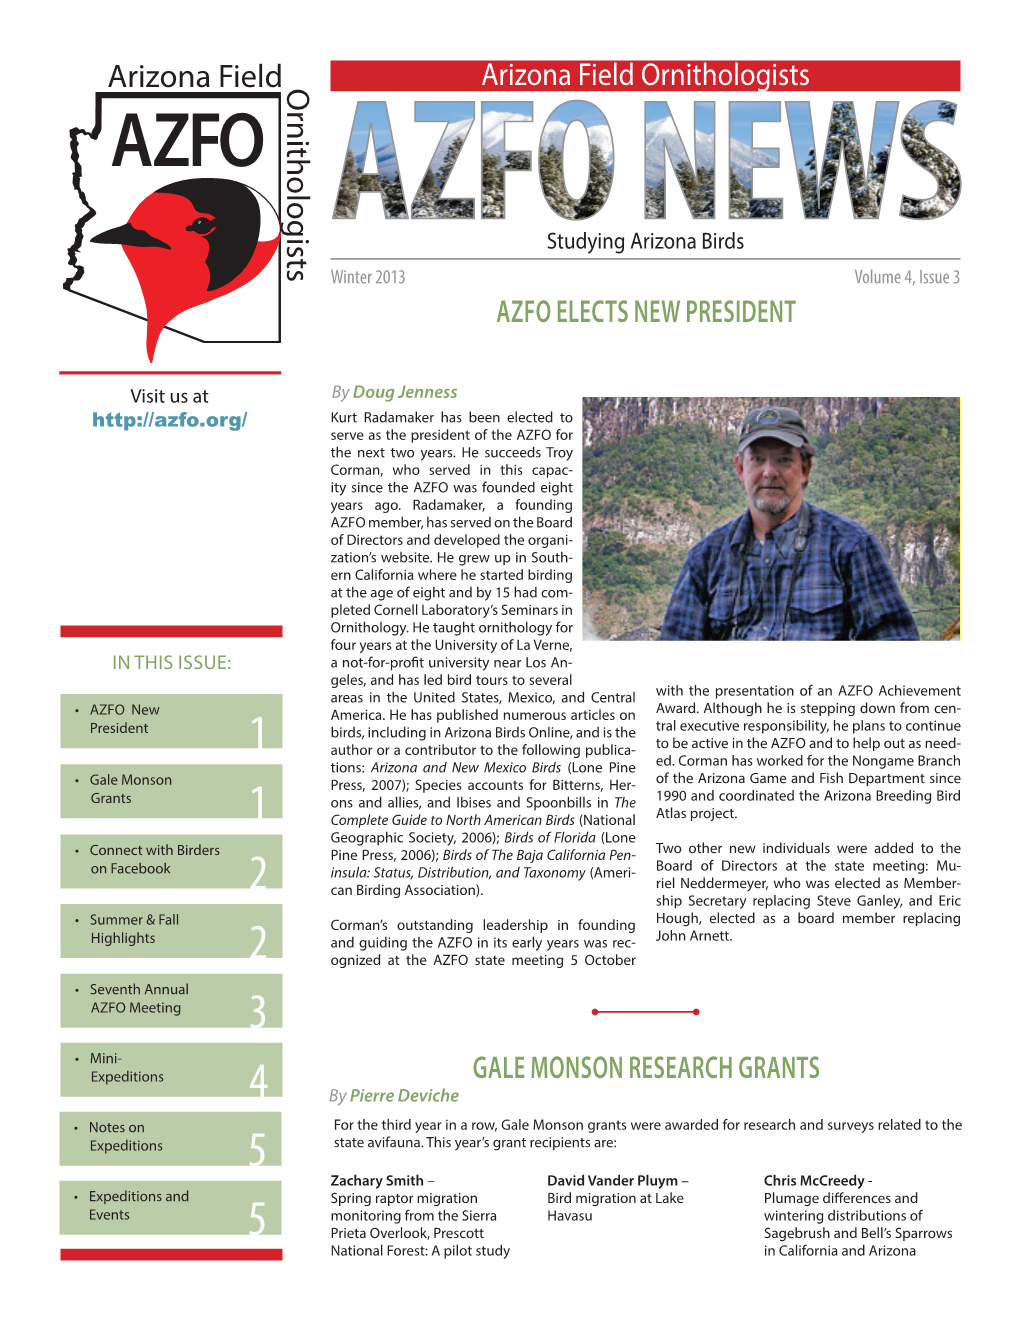 Winter 2013 Volume 4, Issue 3 AZFO Elects New President